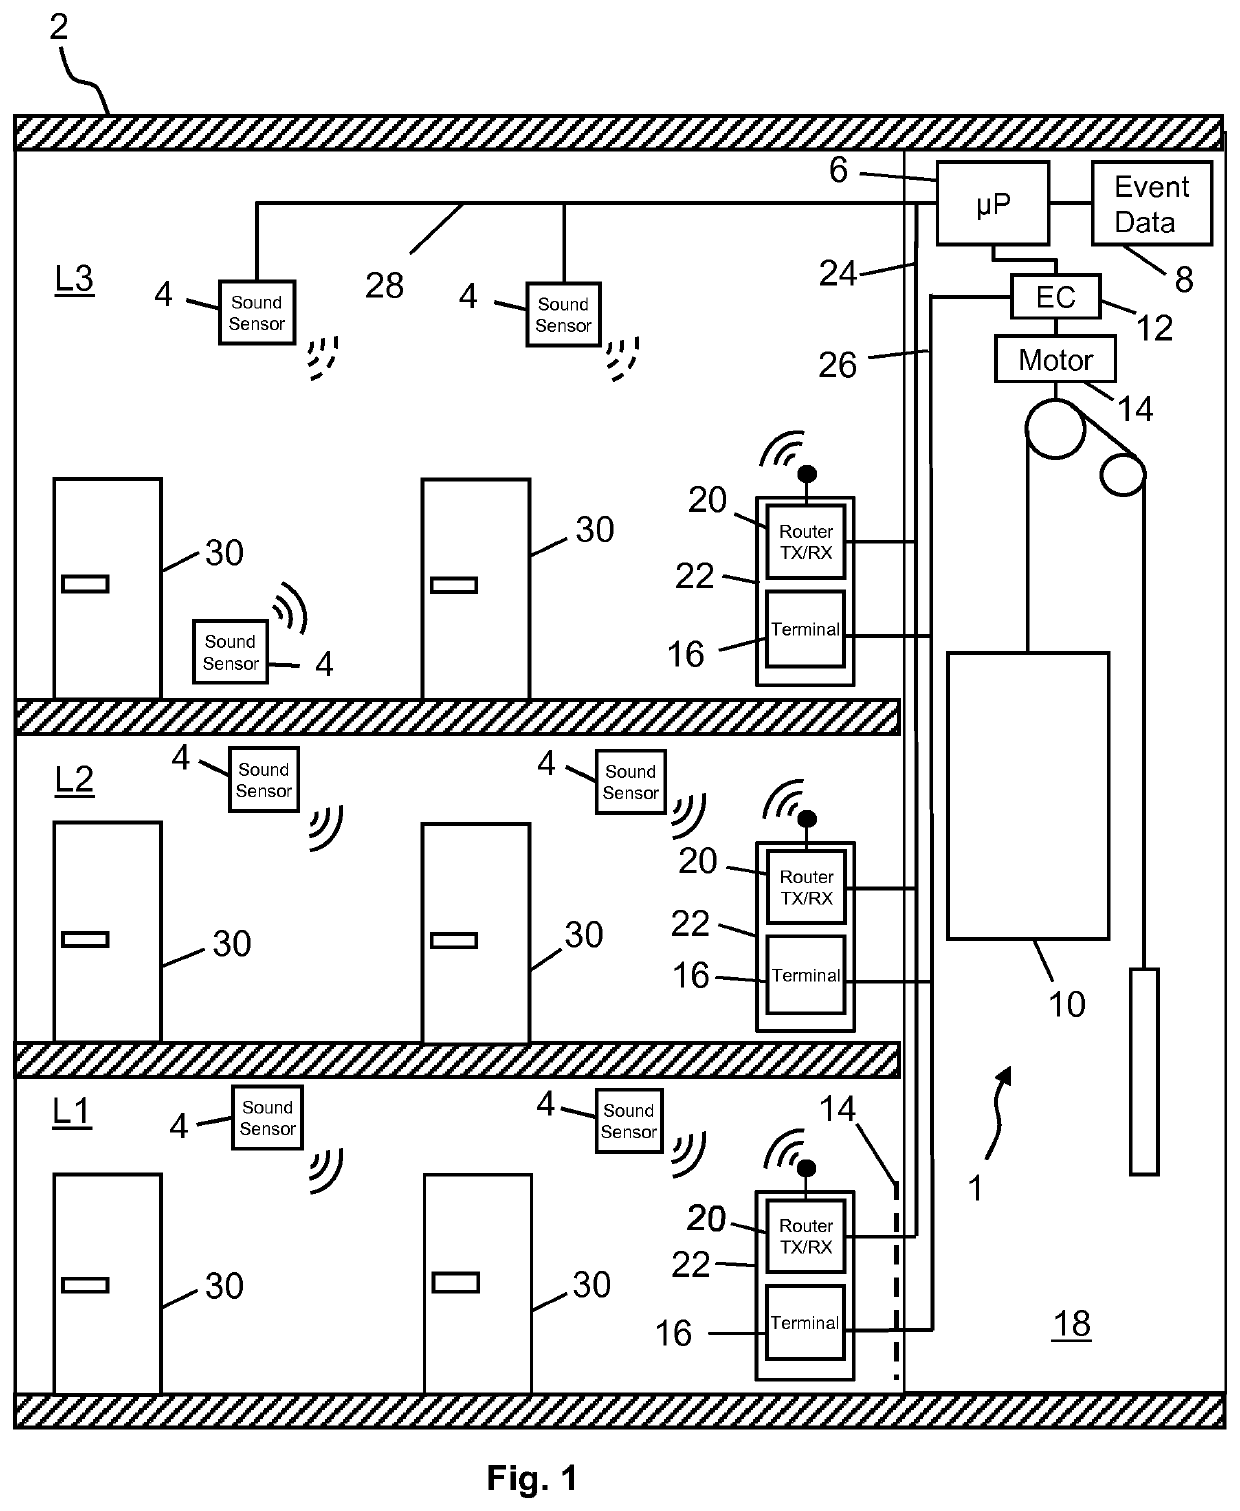 Elevator installation with predictive call based on noise analysis